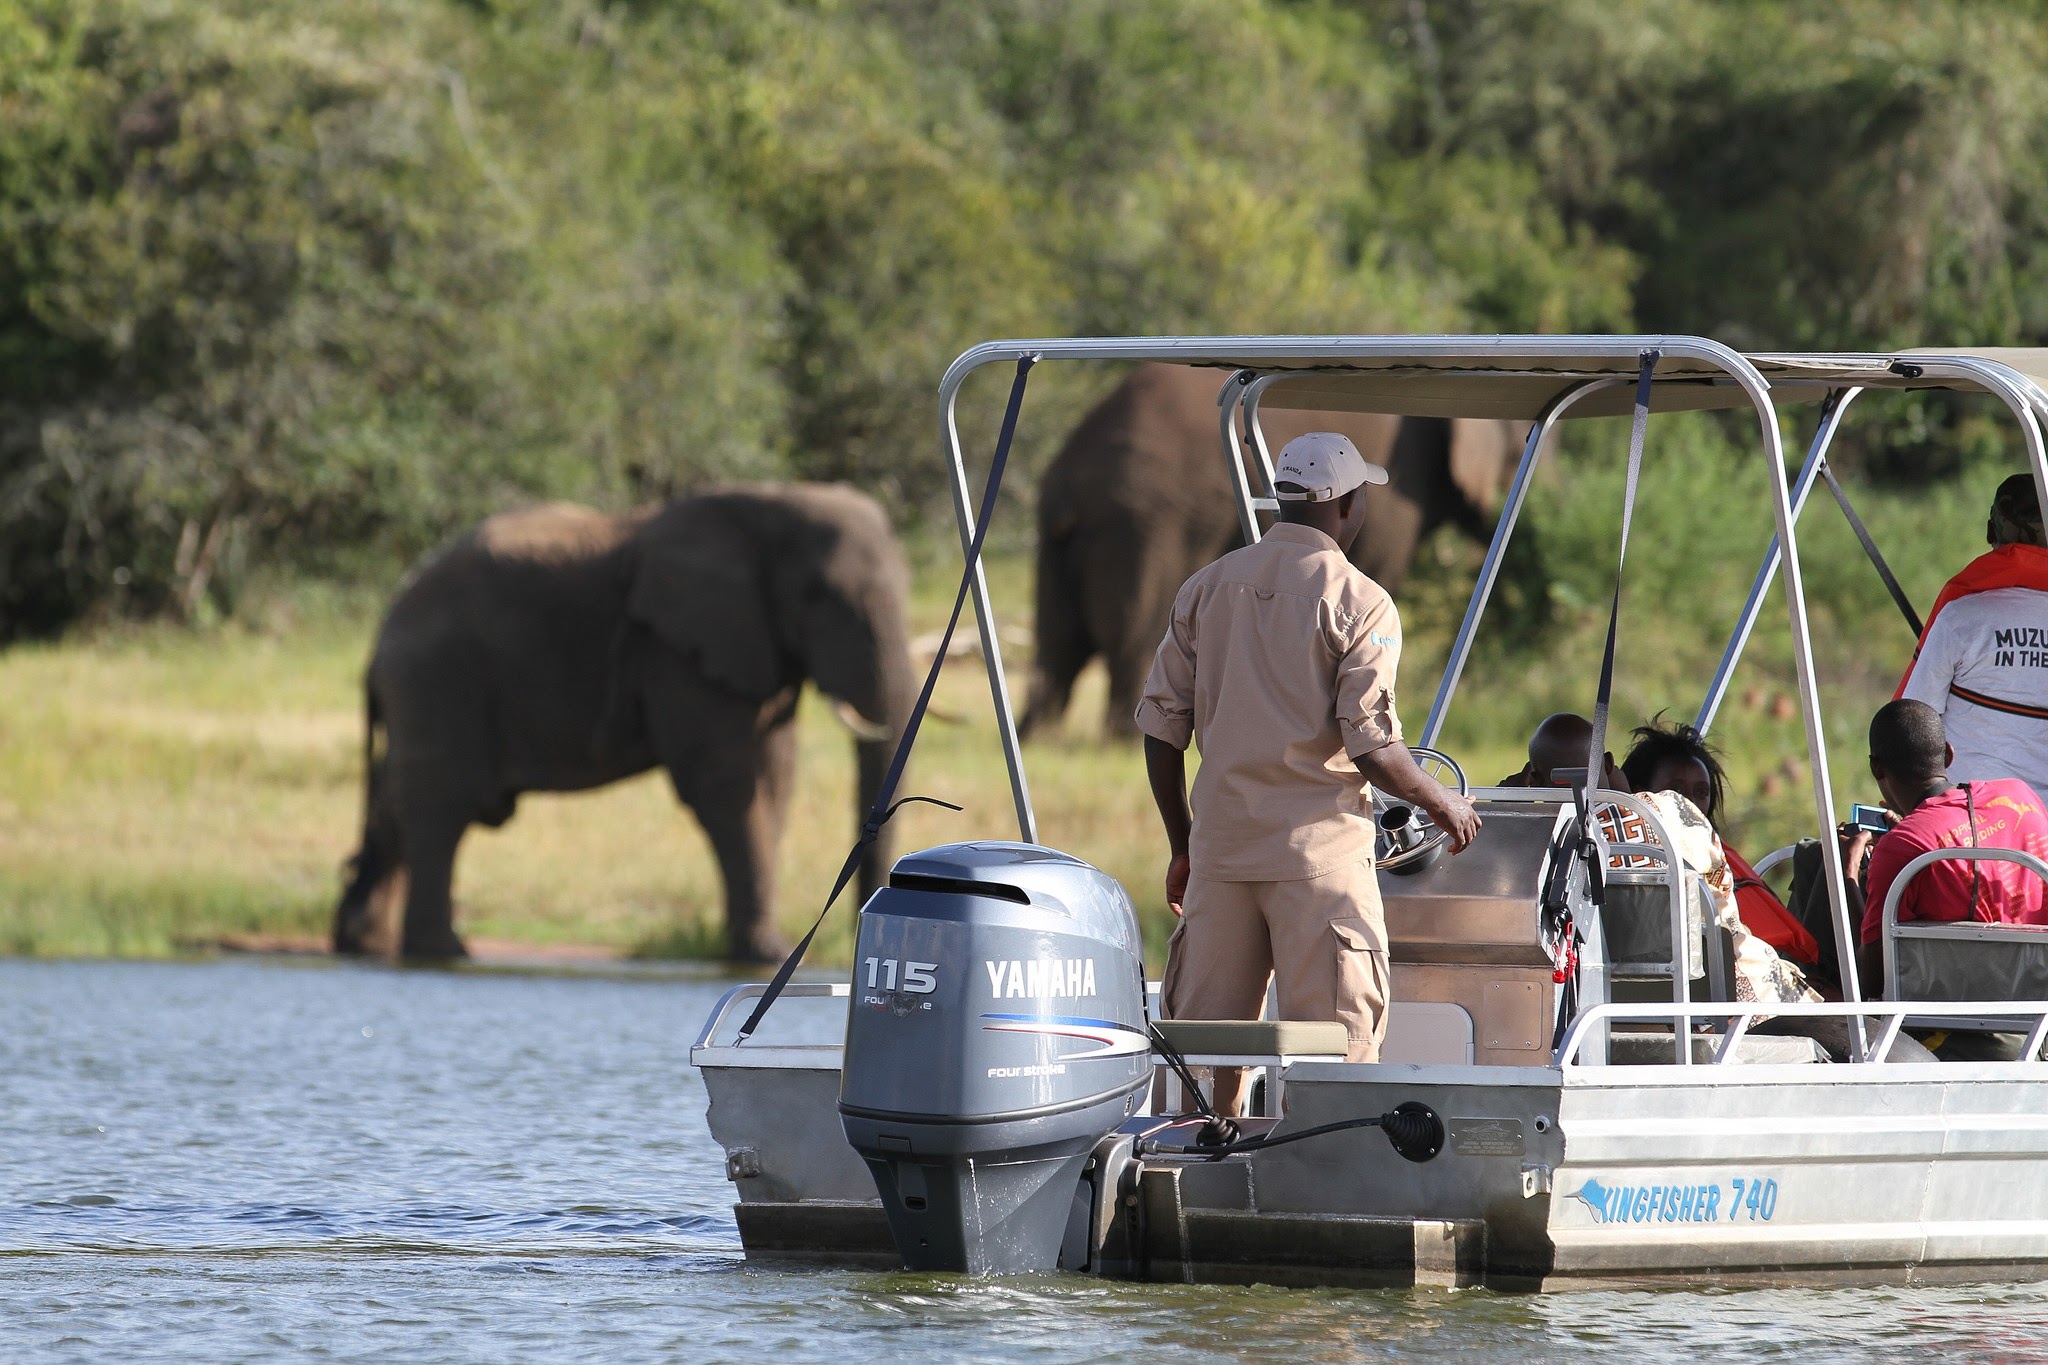  Akagera national park's rolling hills, lakes, and swamps provide a stunning backdrop for wildlife viewing, birdwatching, and boat tours on Lake Ihema.